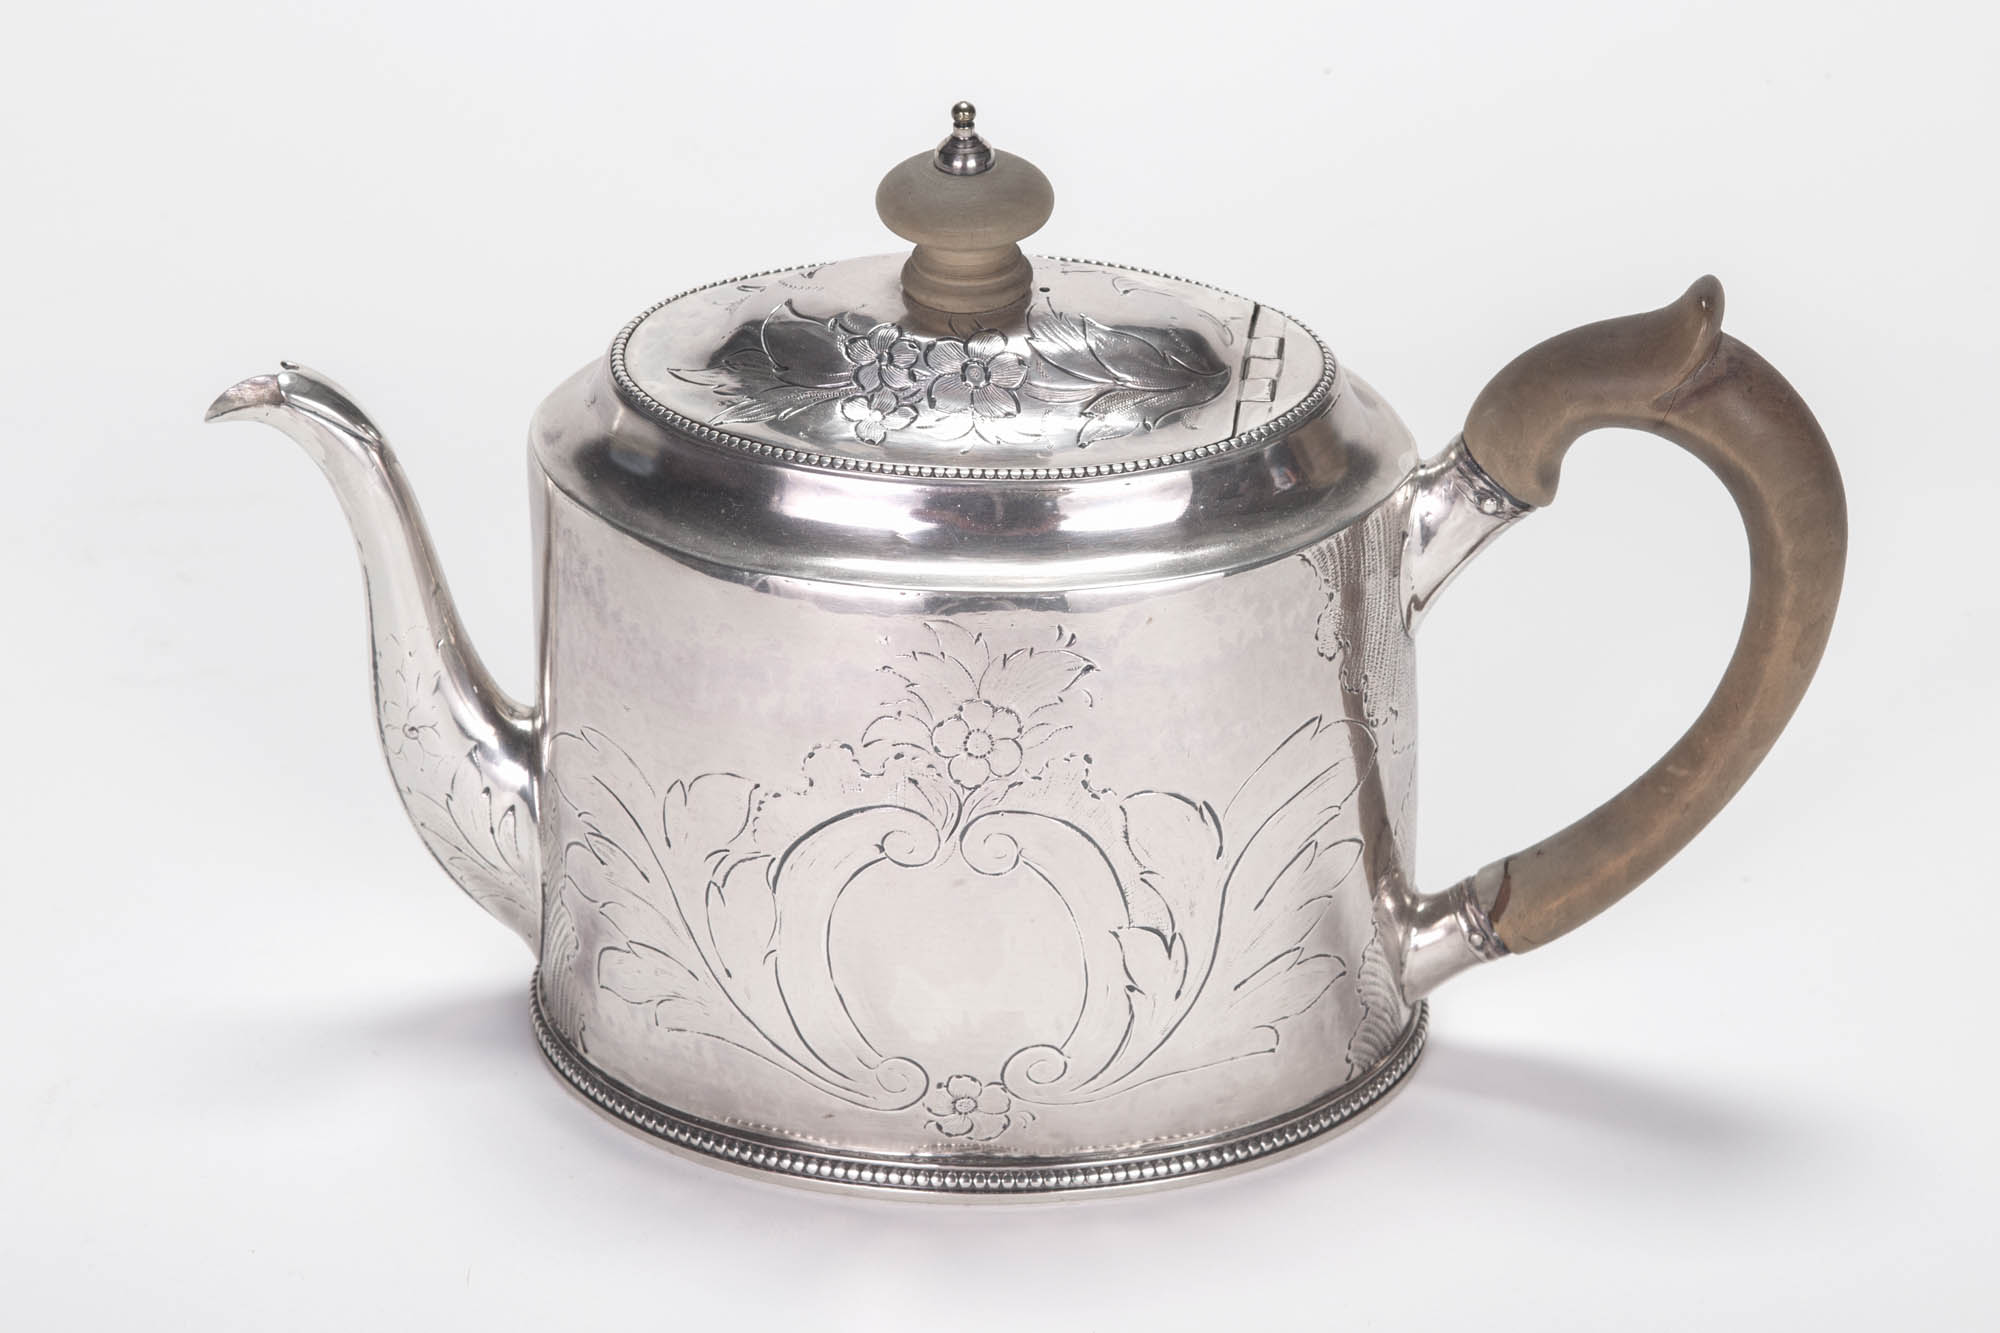 Silver and Silver-plated Teapots Still Shine